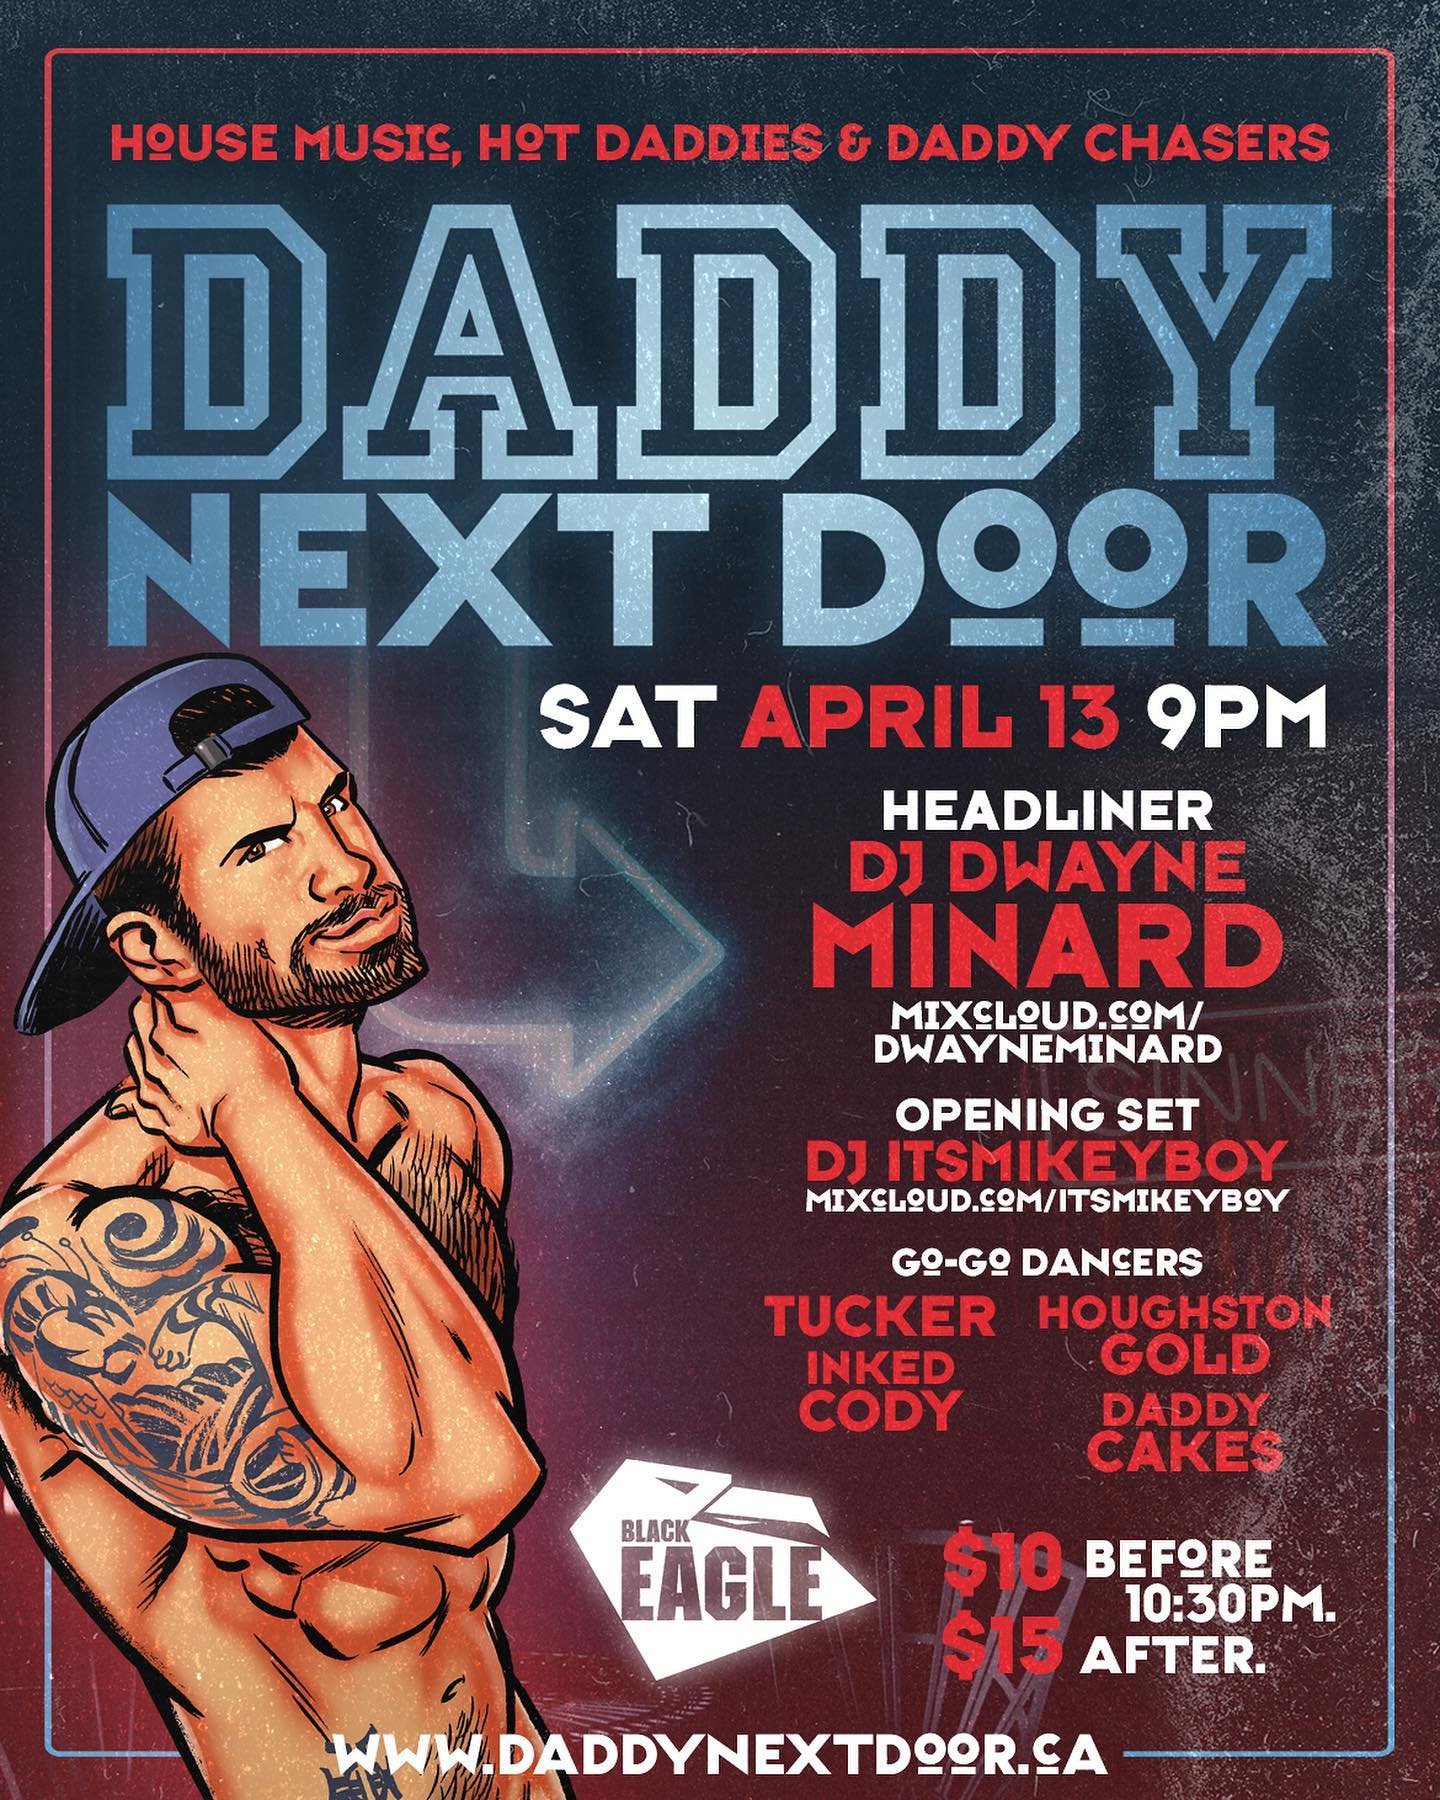 Daddy&rsquo;s and daddy lovers! DADDY NEXT DOOR IS TONIGHT! With hot gogo dancers and good beats from @dminard and @itsmikeyboy all night long, come spend your Saturday night with us! Party starts at 9PM